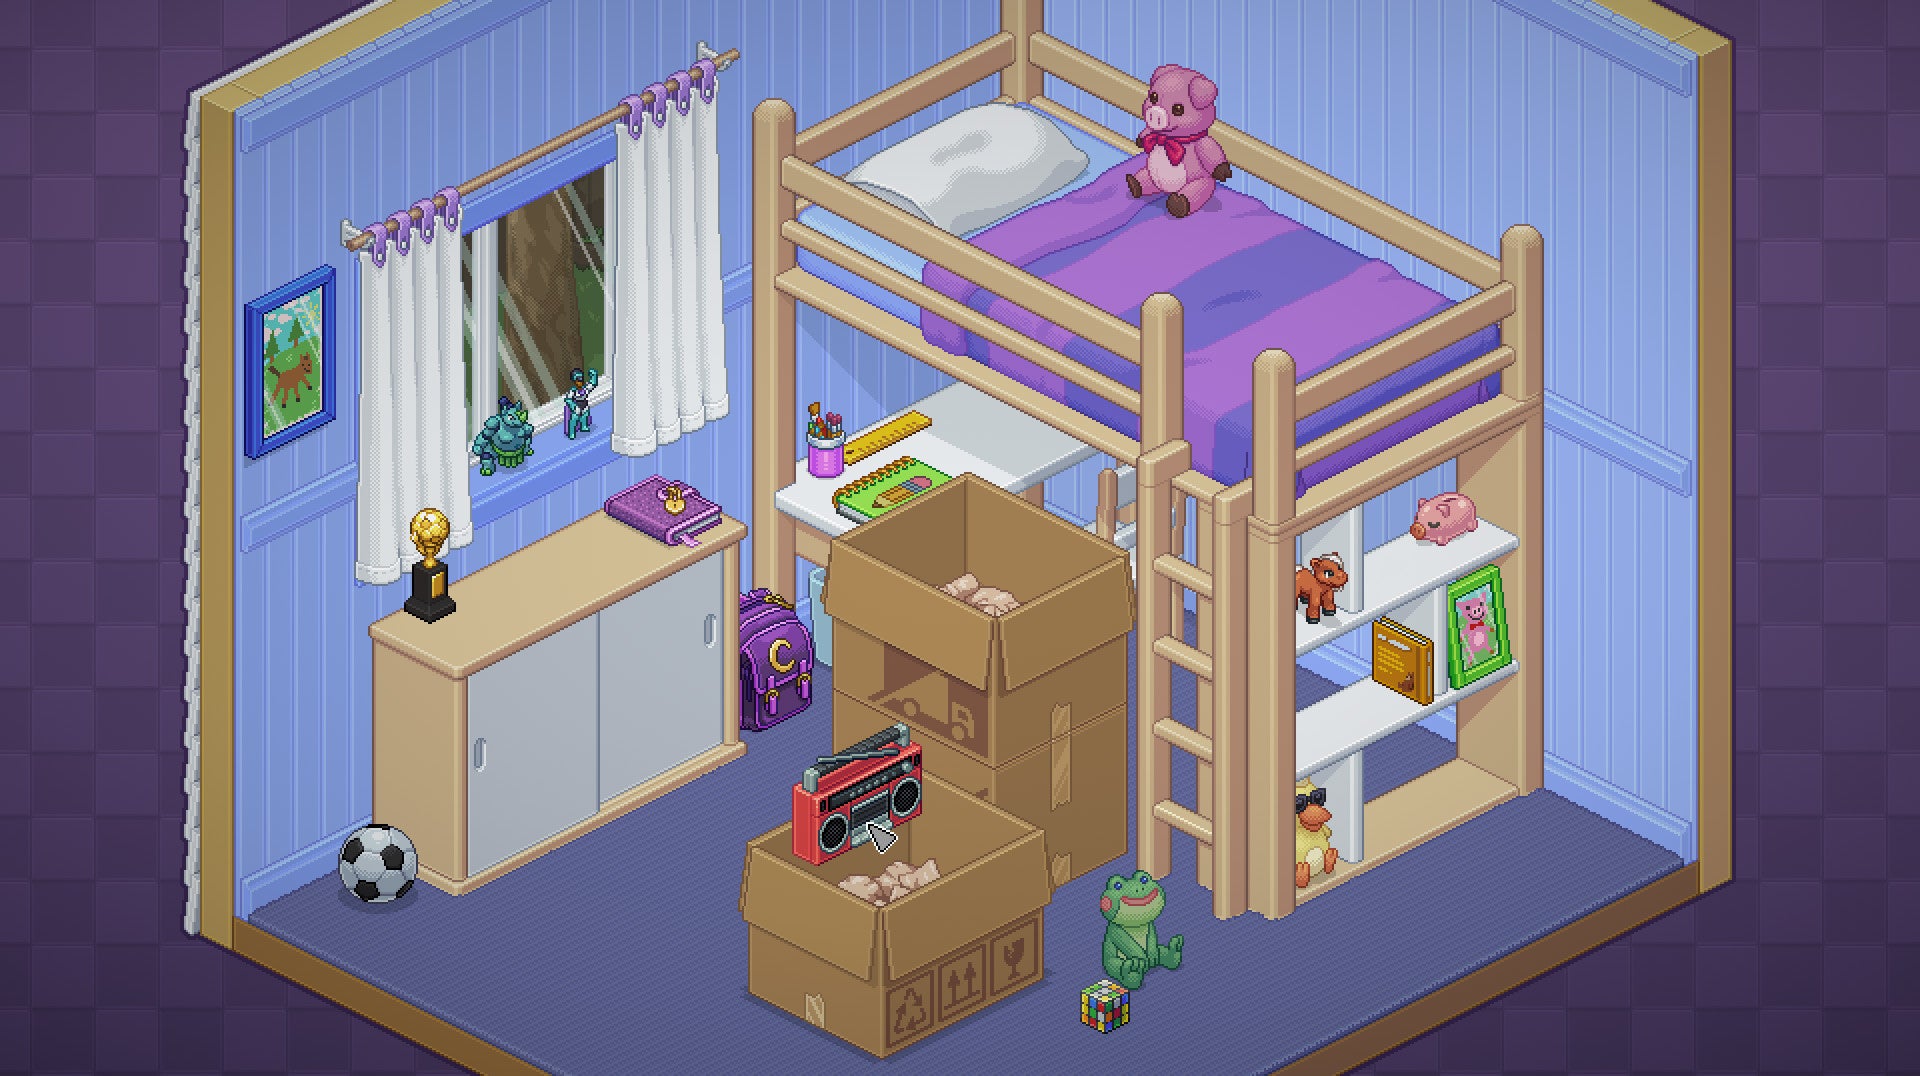 https://assets.reedpopcdn.com/acclaimed-tidy-em-up-unpacking-is-heading-to-playstation-4-and-ps5-soon-1648574456876.jpg/BROK/thumbnail/1600x800/format/jpg/quality/80/acclaimed-tidy-em-up-unpacking-is-heading-to-playstation-4-and-ps5-soon-1648574456876.jpg